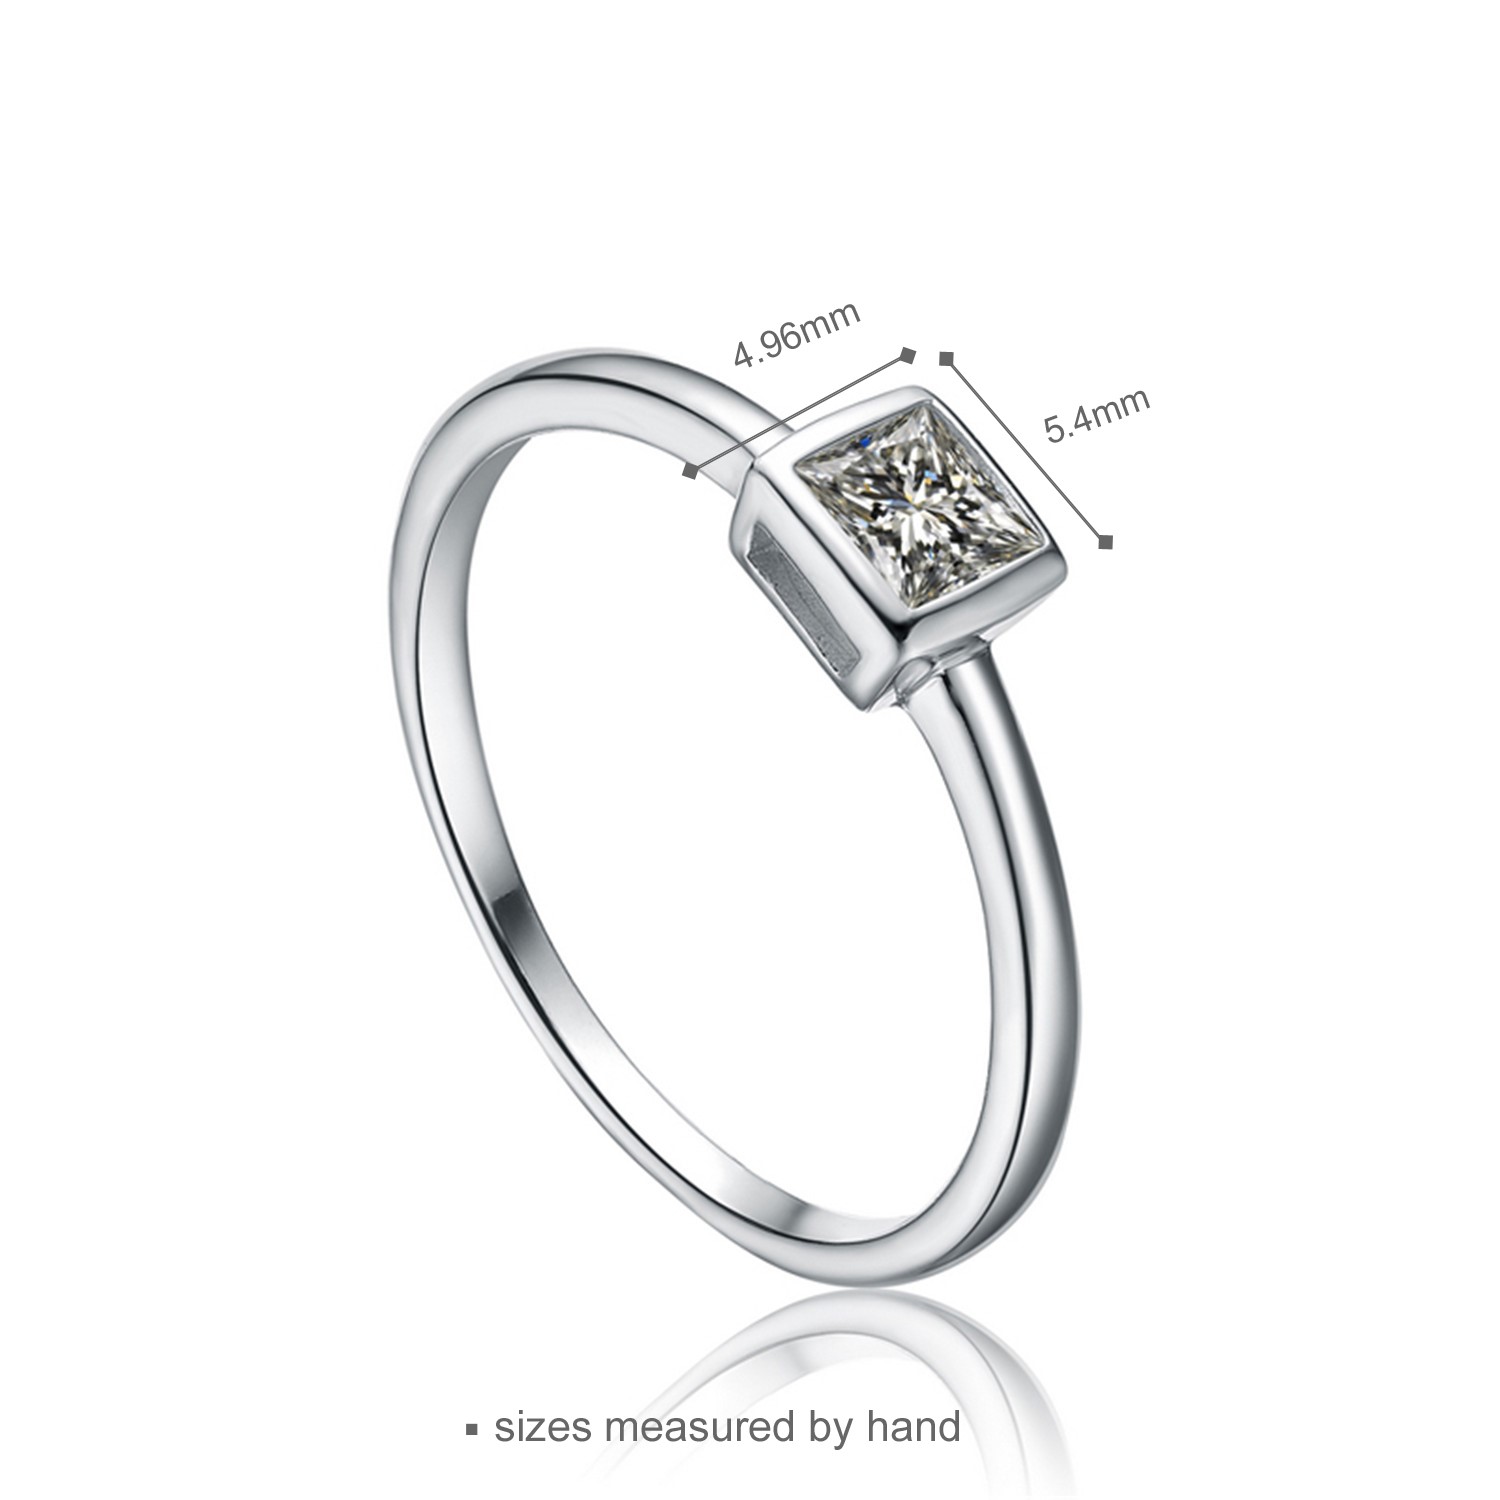 Light Simple Small Square Jewelry Female Cute Finger Rings Women Girls Ring White CZ 925 Silver (图3)